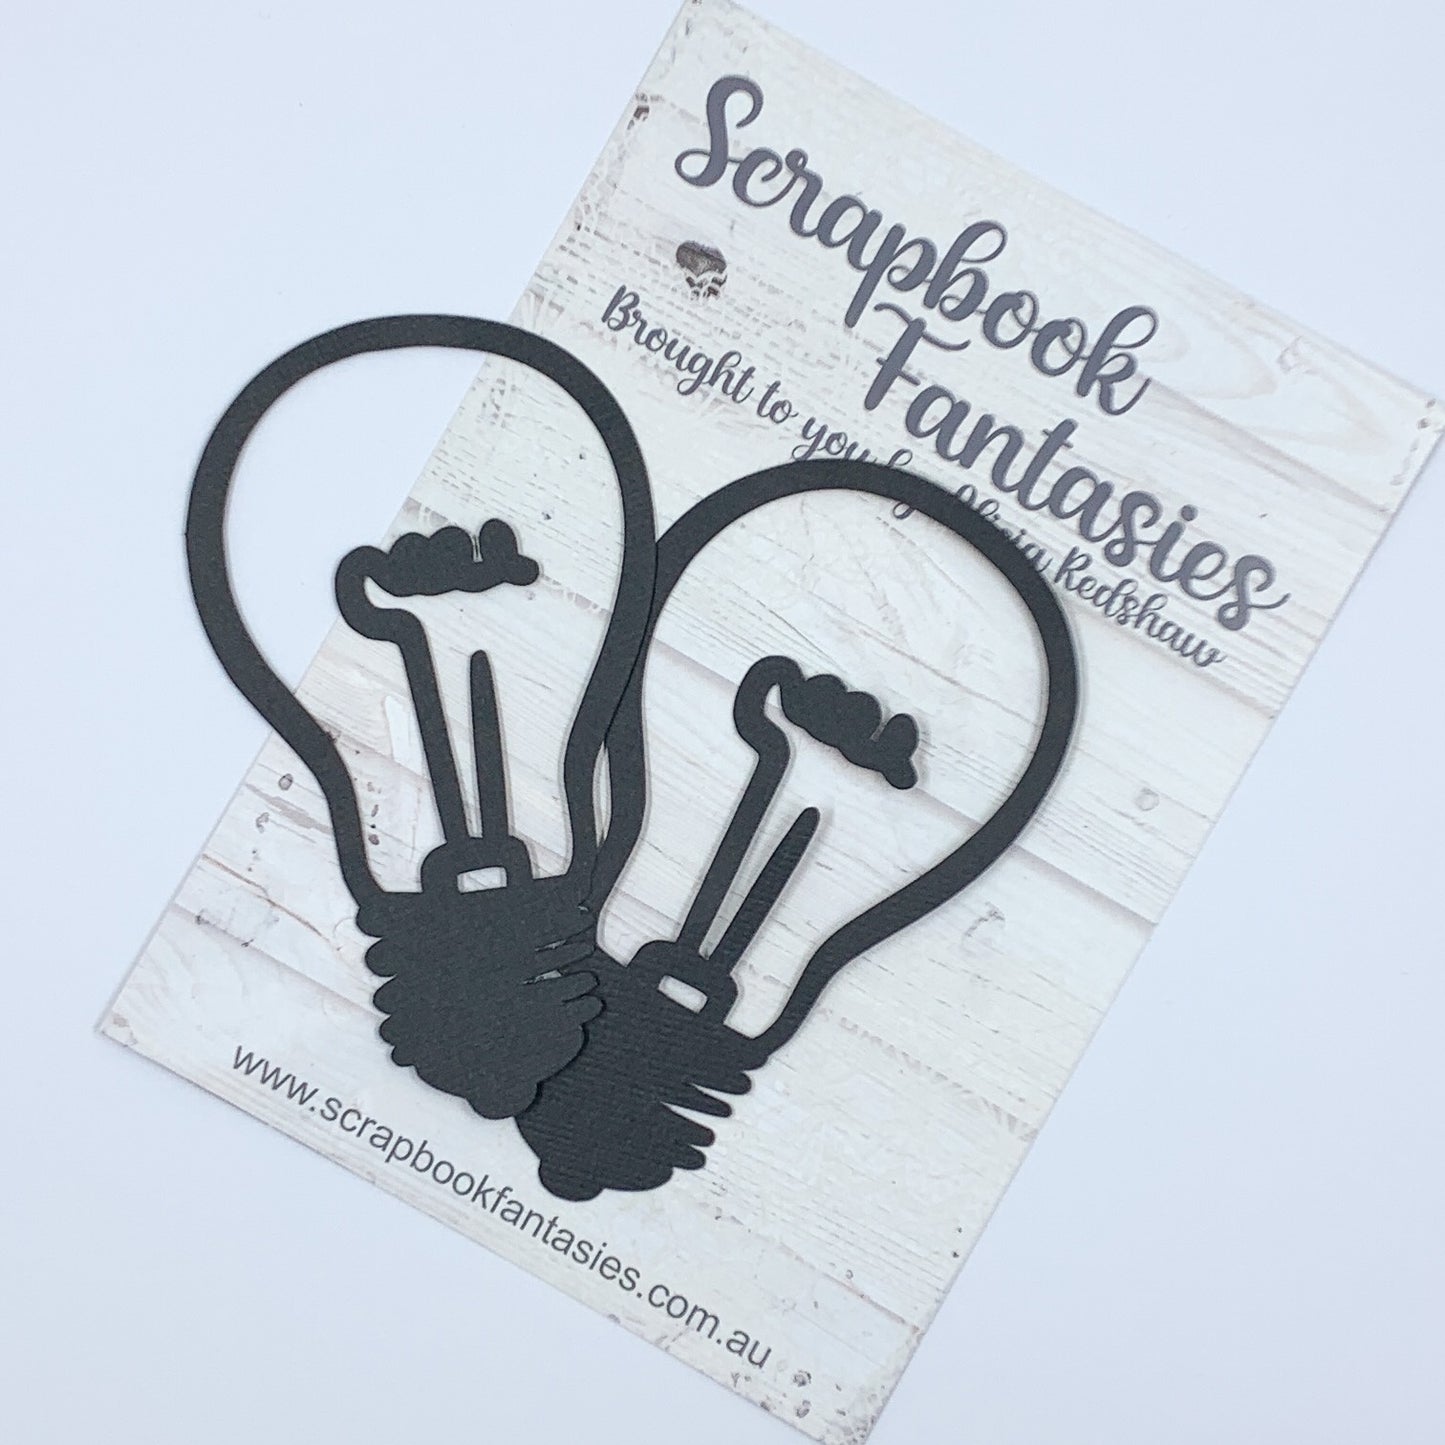 Robot Antics - Large Light Bulbs (2 pack) 4.25"x2.5" Black Linen Cardstock Picture-Cut - Designed by Alicia Redshaw